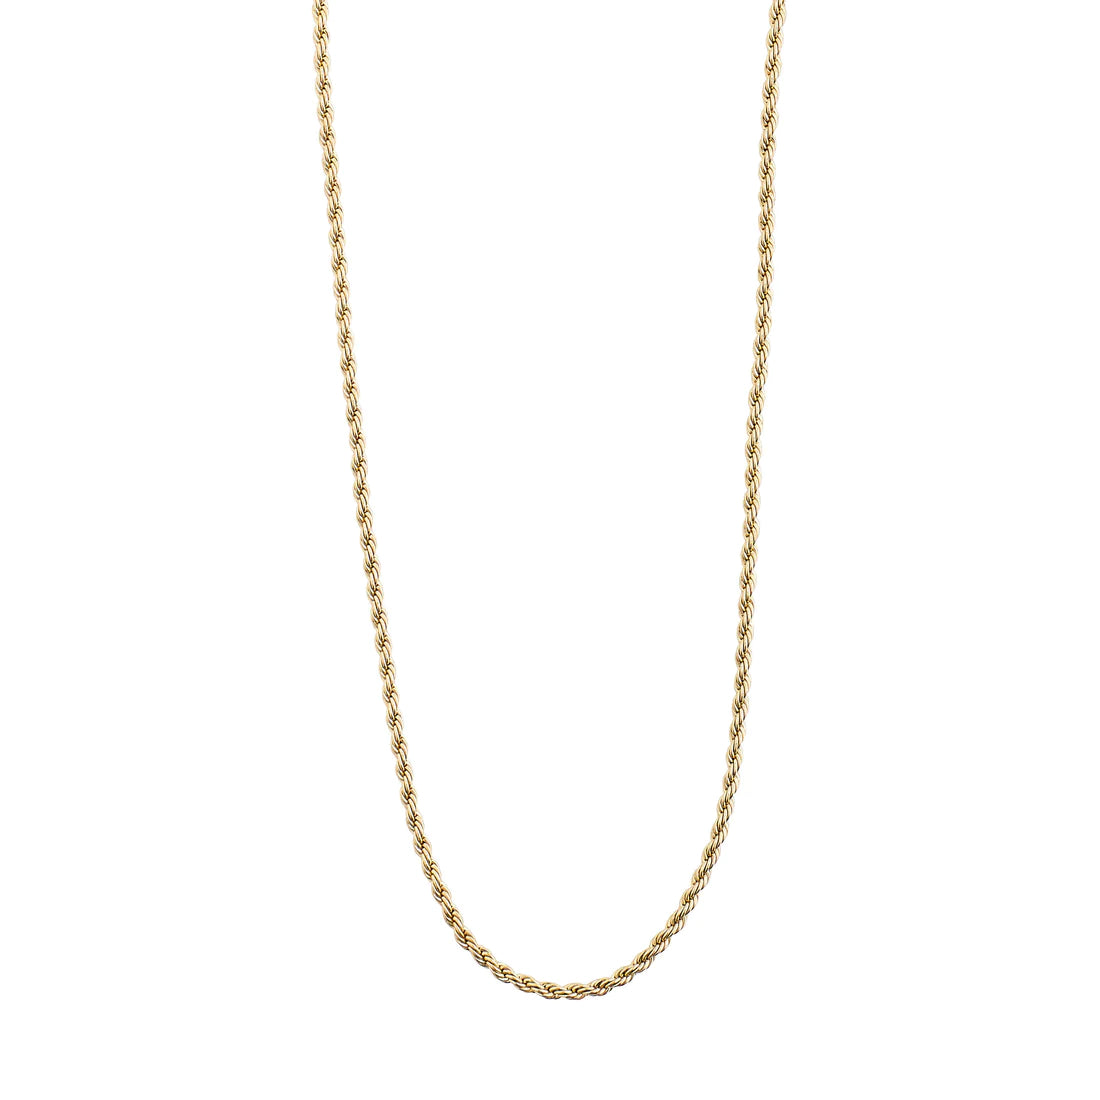 Rope Twist Chain Necklace